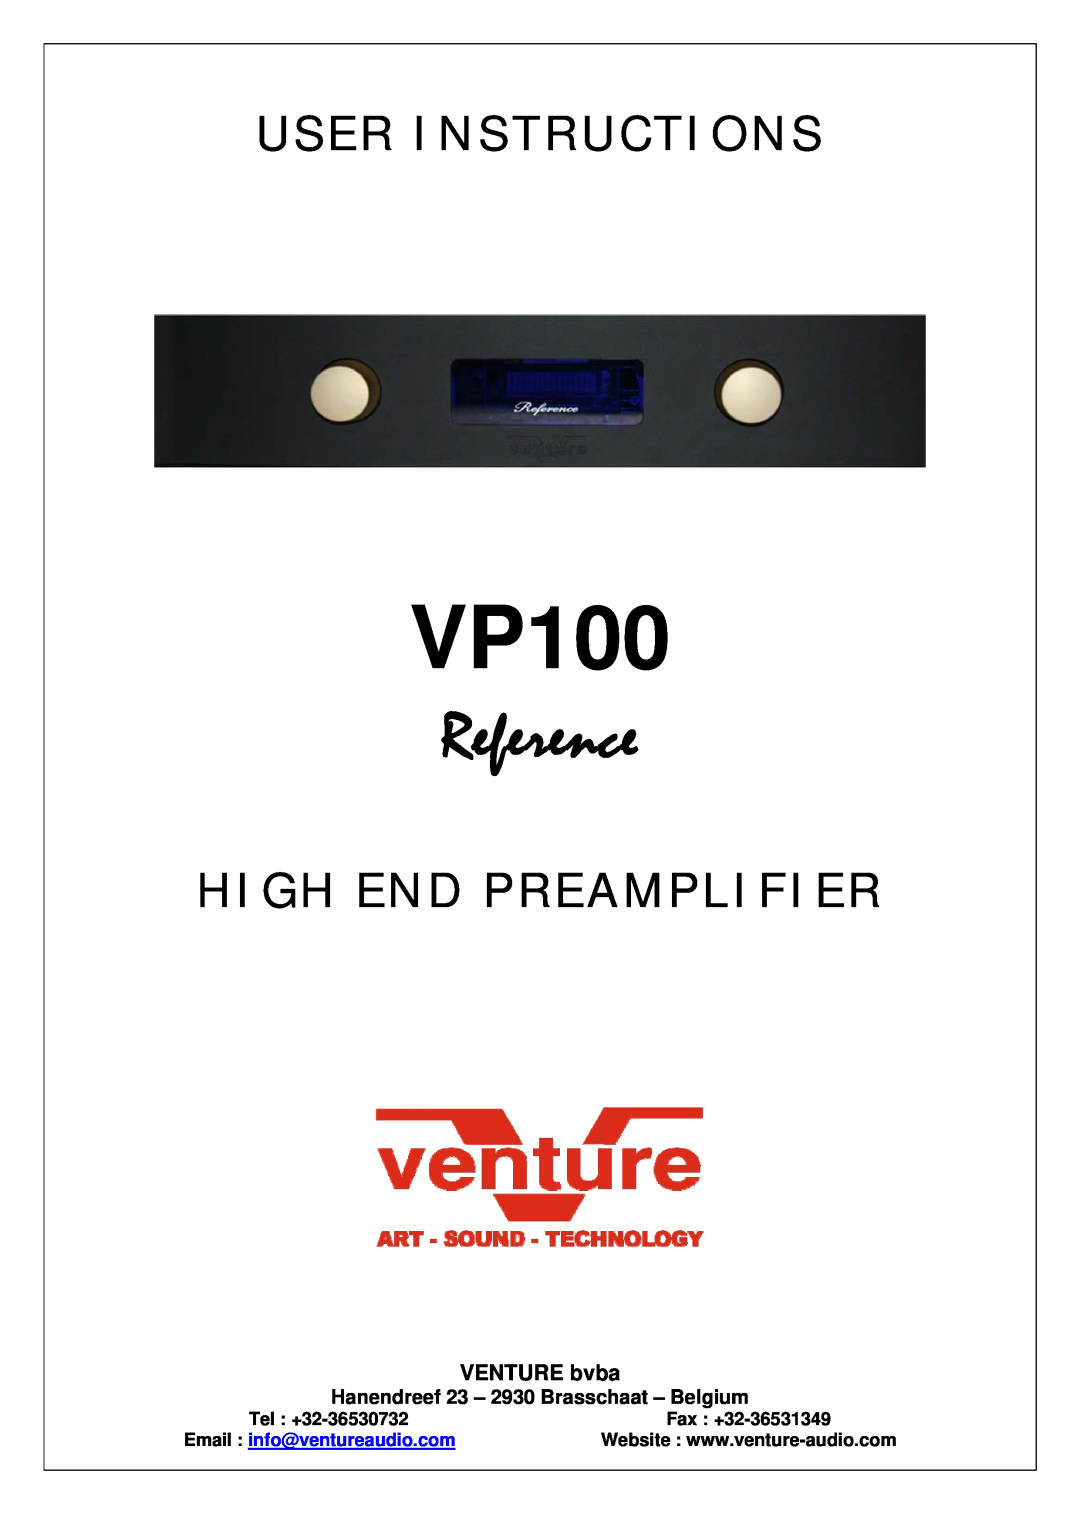 Venture Products VP100 manual VENTURE bvba, Reference, User Instructions, High End Preamplifier, Tel +32-36530732 